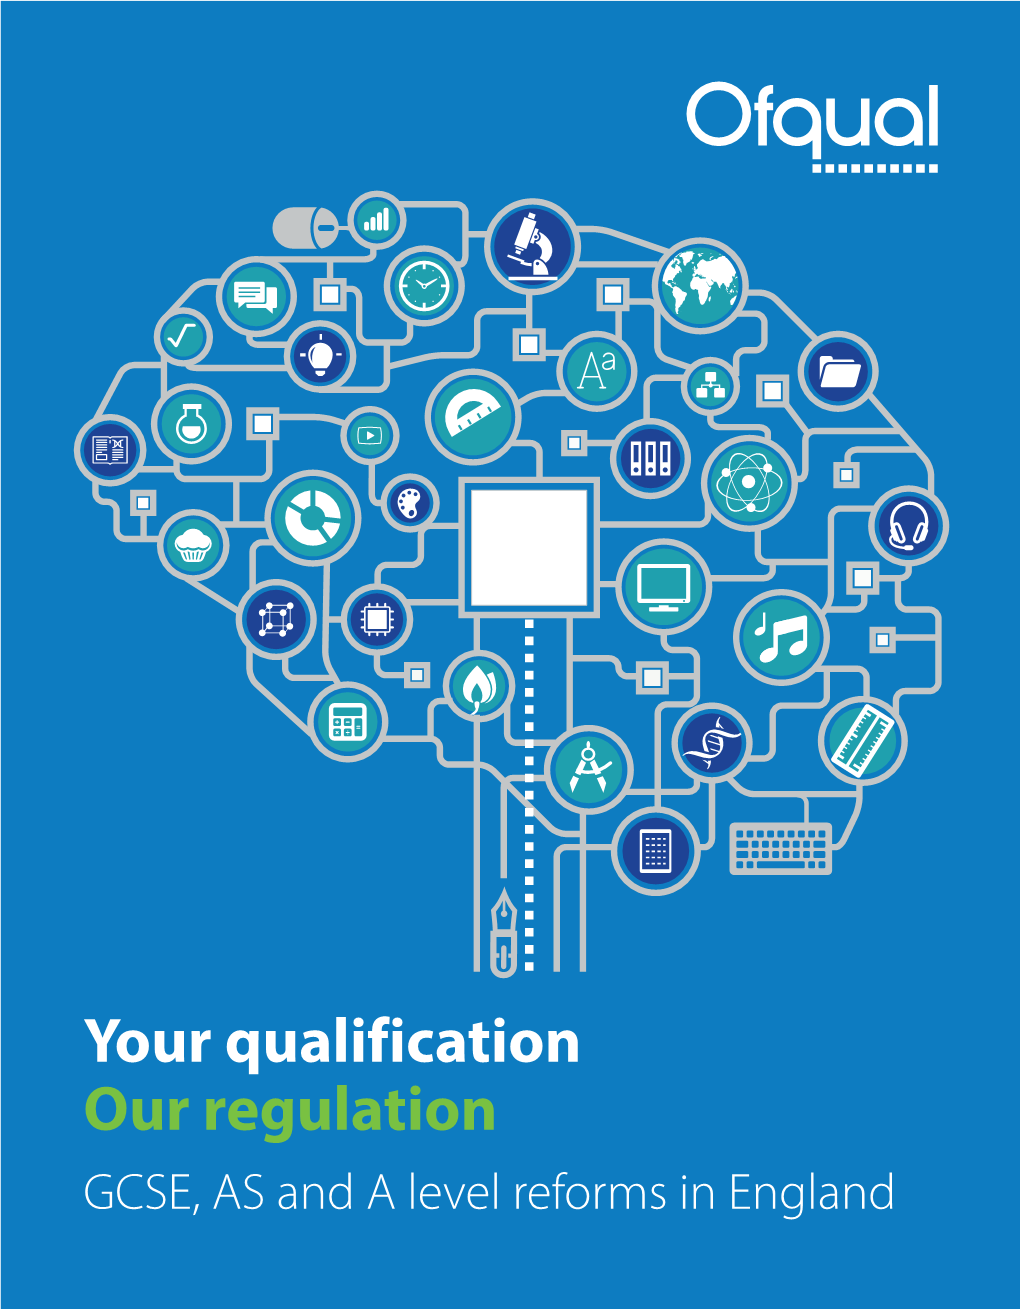 OFQUAL Results Information